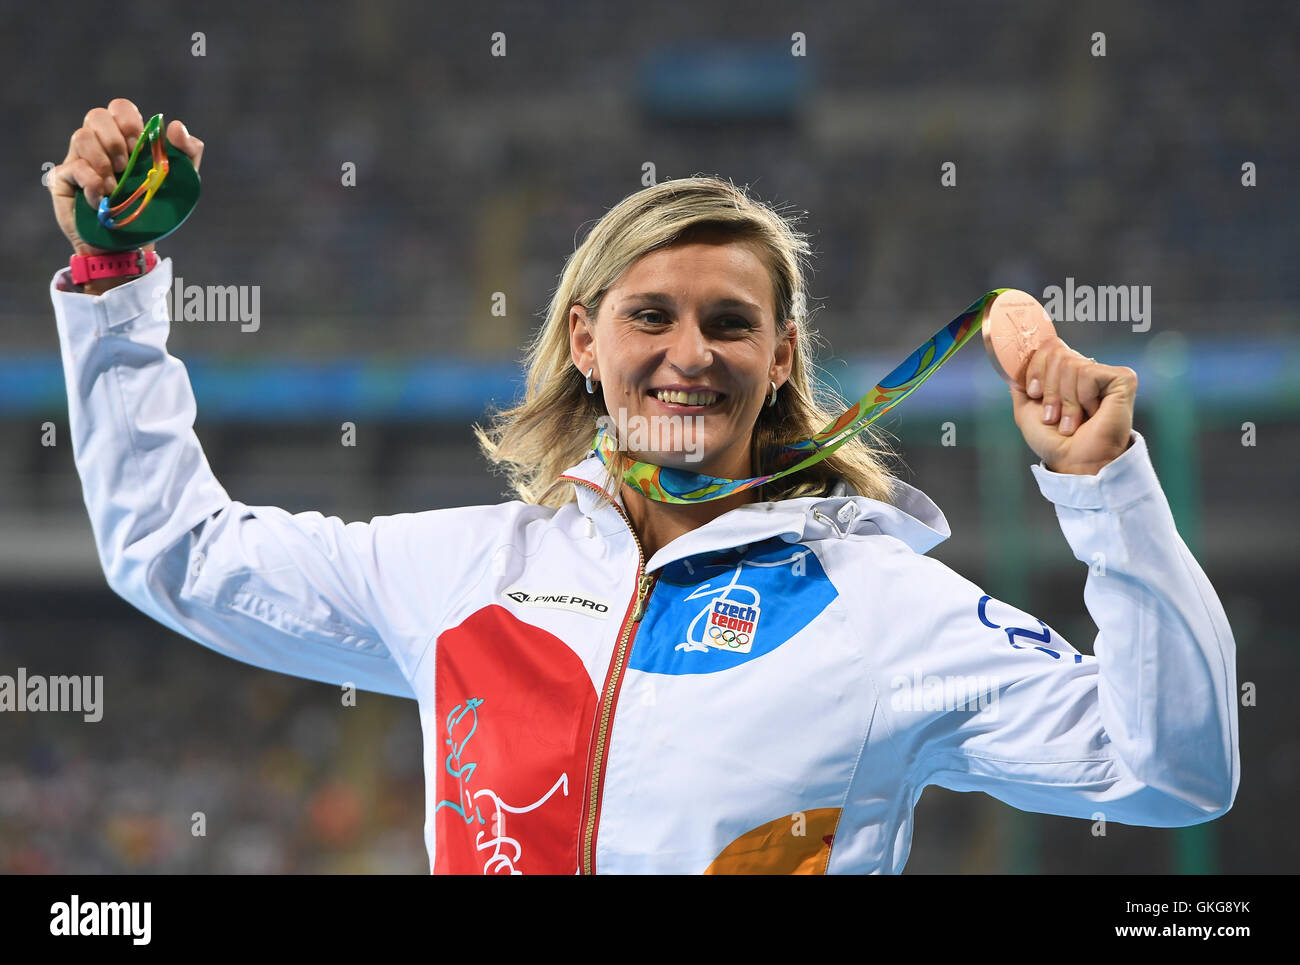 Rio de Janeiro, Brazil. 19th August, 2016. Barbora Spotakova of the Czech Republic with her bronze medal in the women's javelin during the evening session on Day 14 Athletics of the 2016 Rio Olympics at Olympic Stadium on August 19, 2016 in Rio de Janeiro, Brazil. Credit:  Roger Sedres/Alamy Live News Stock Photo